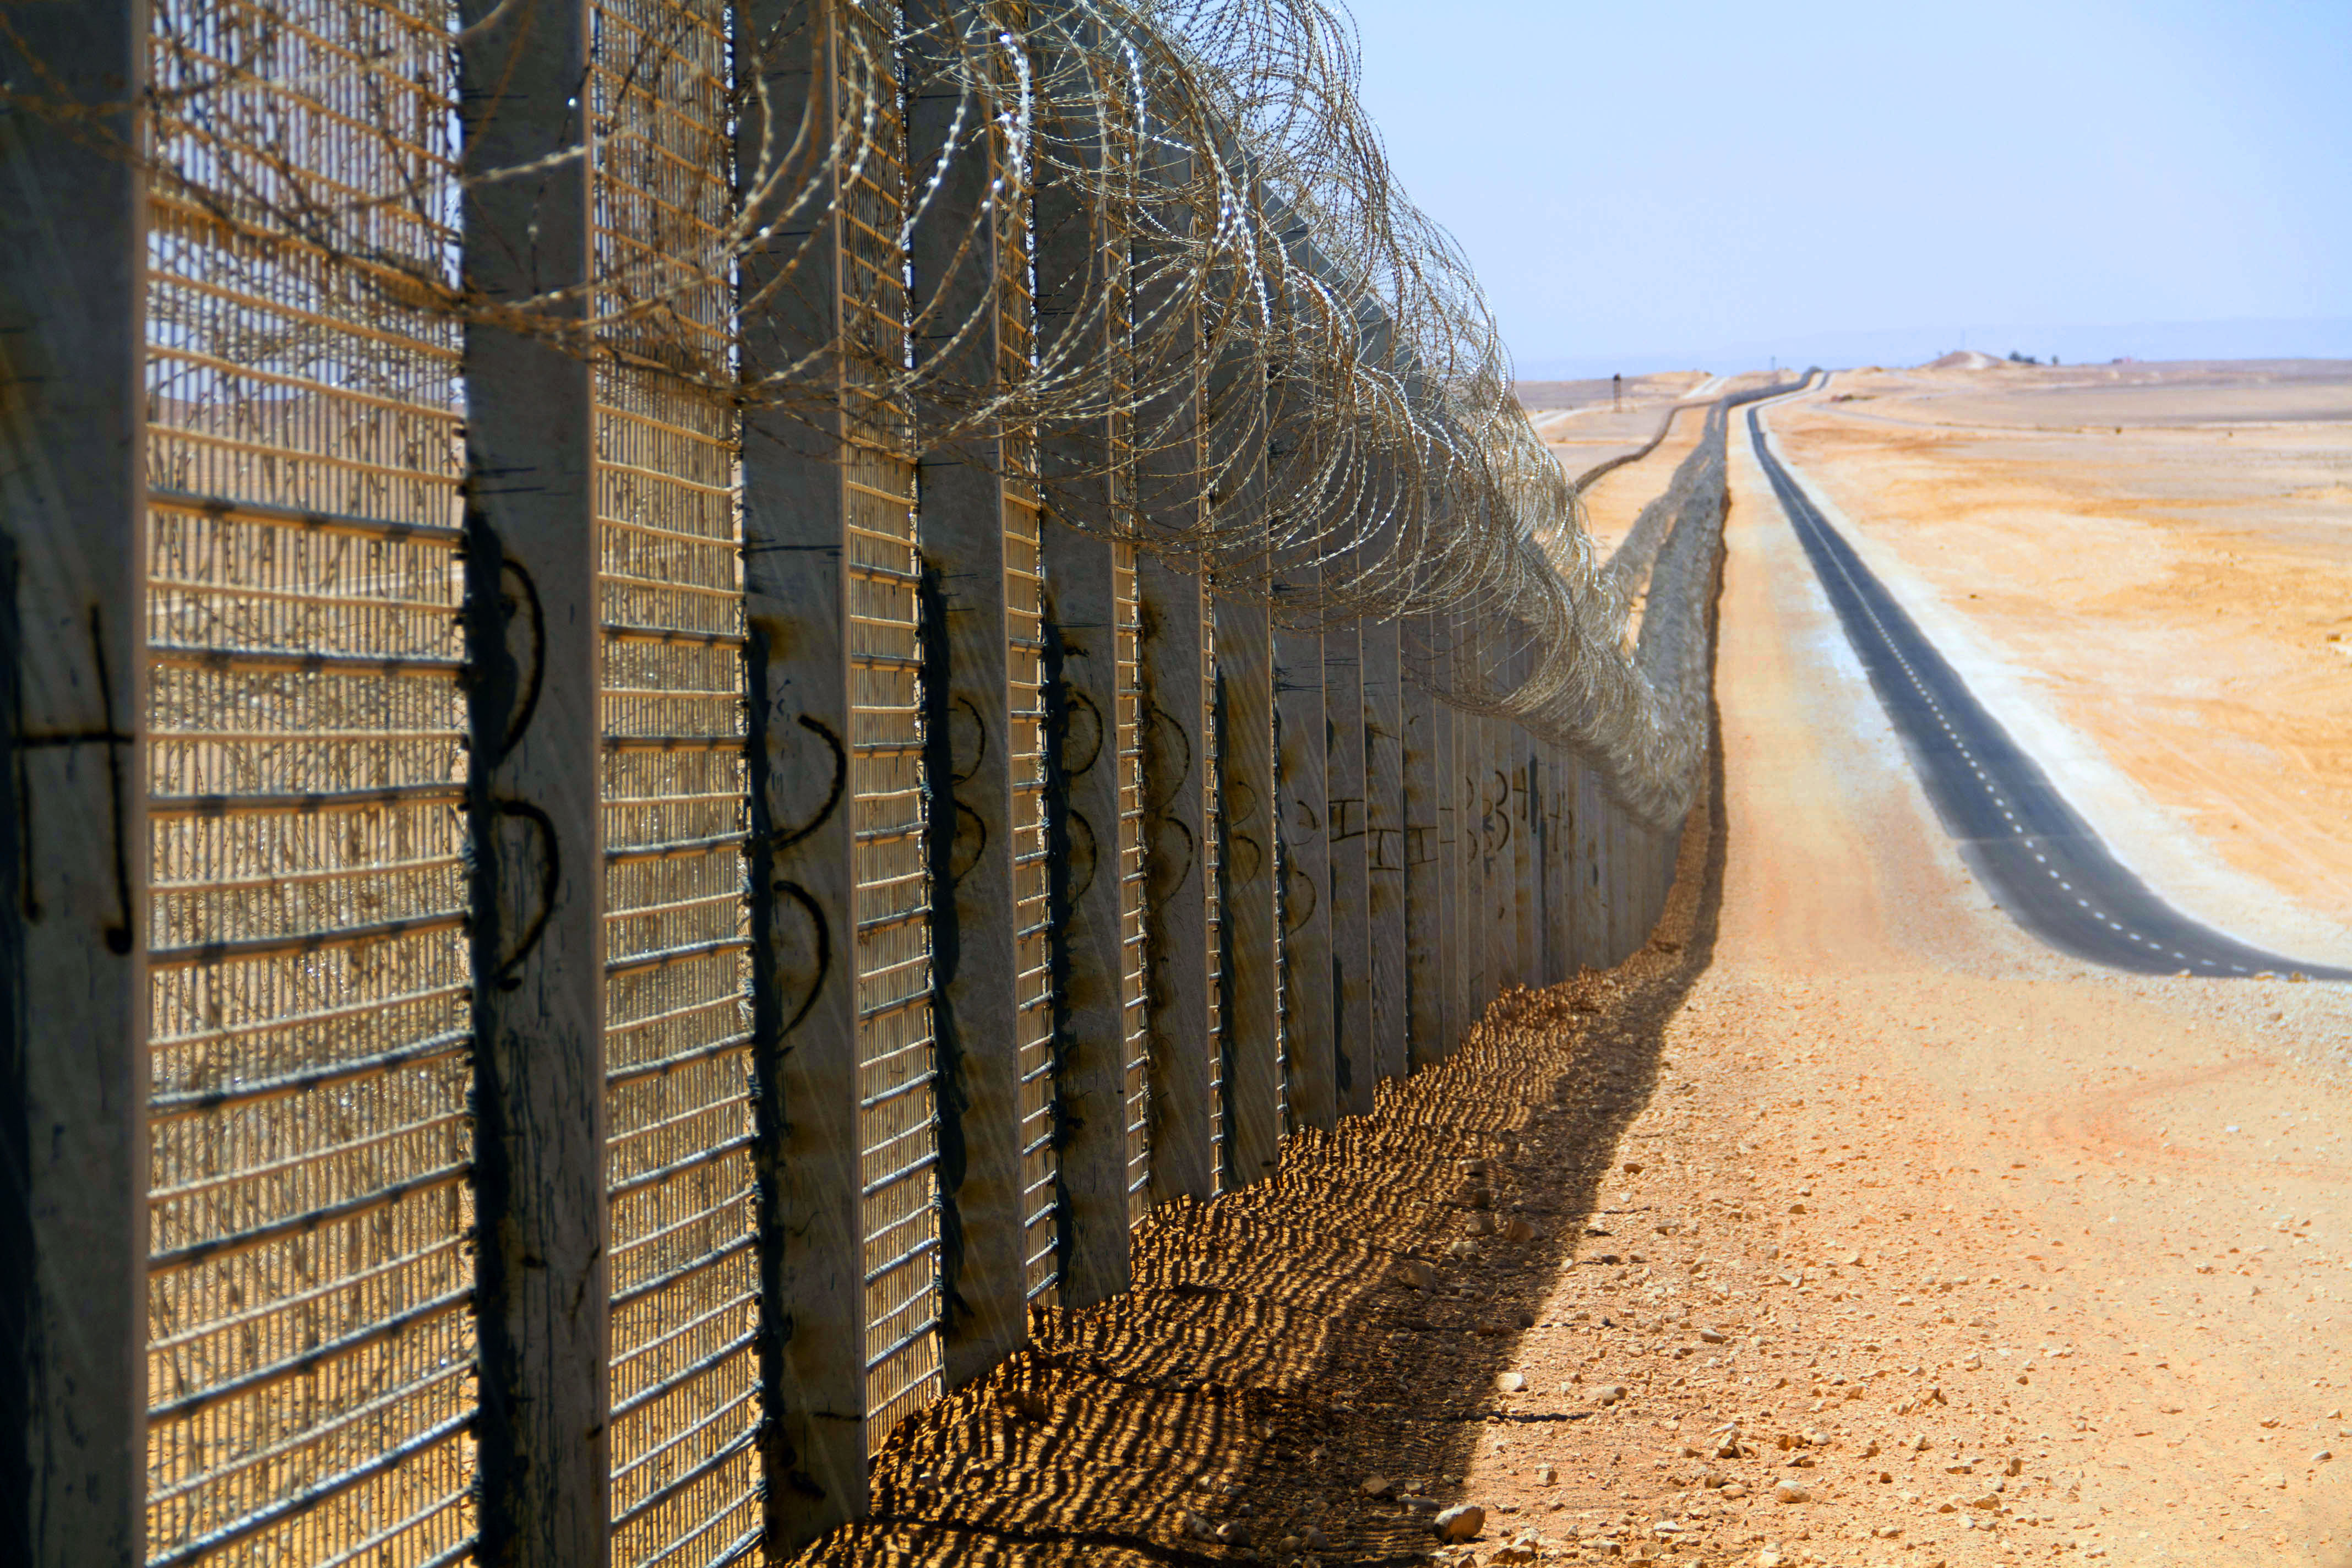 Jordan and Syria border open to civilians and trade